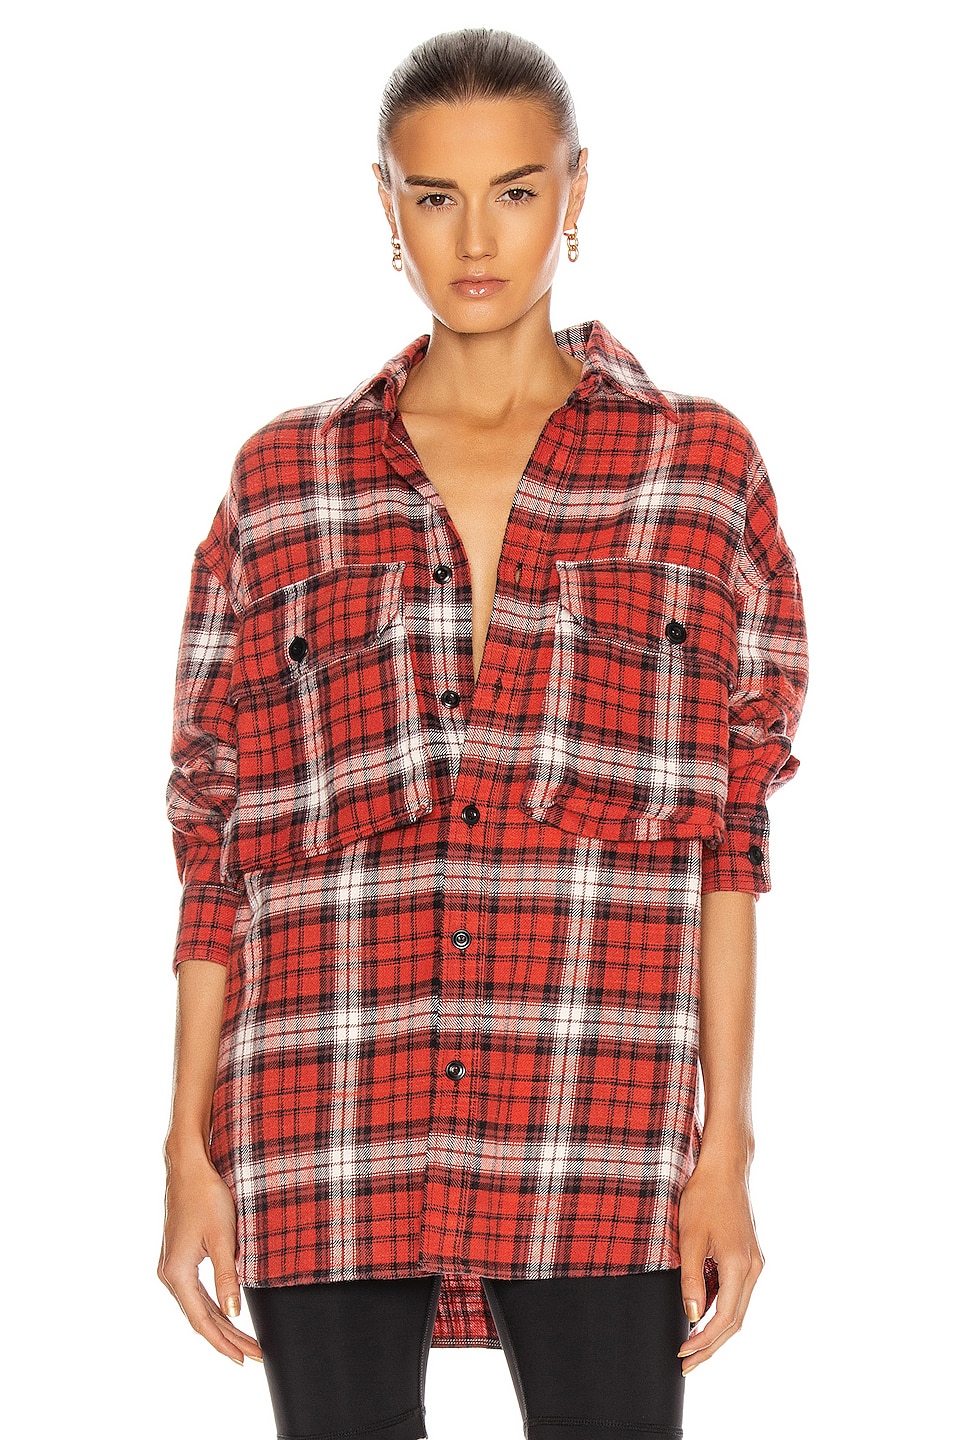 R13 Oversized Shirt in Red Plaid | FWRD